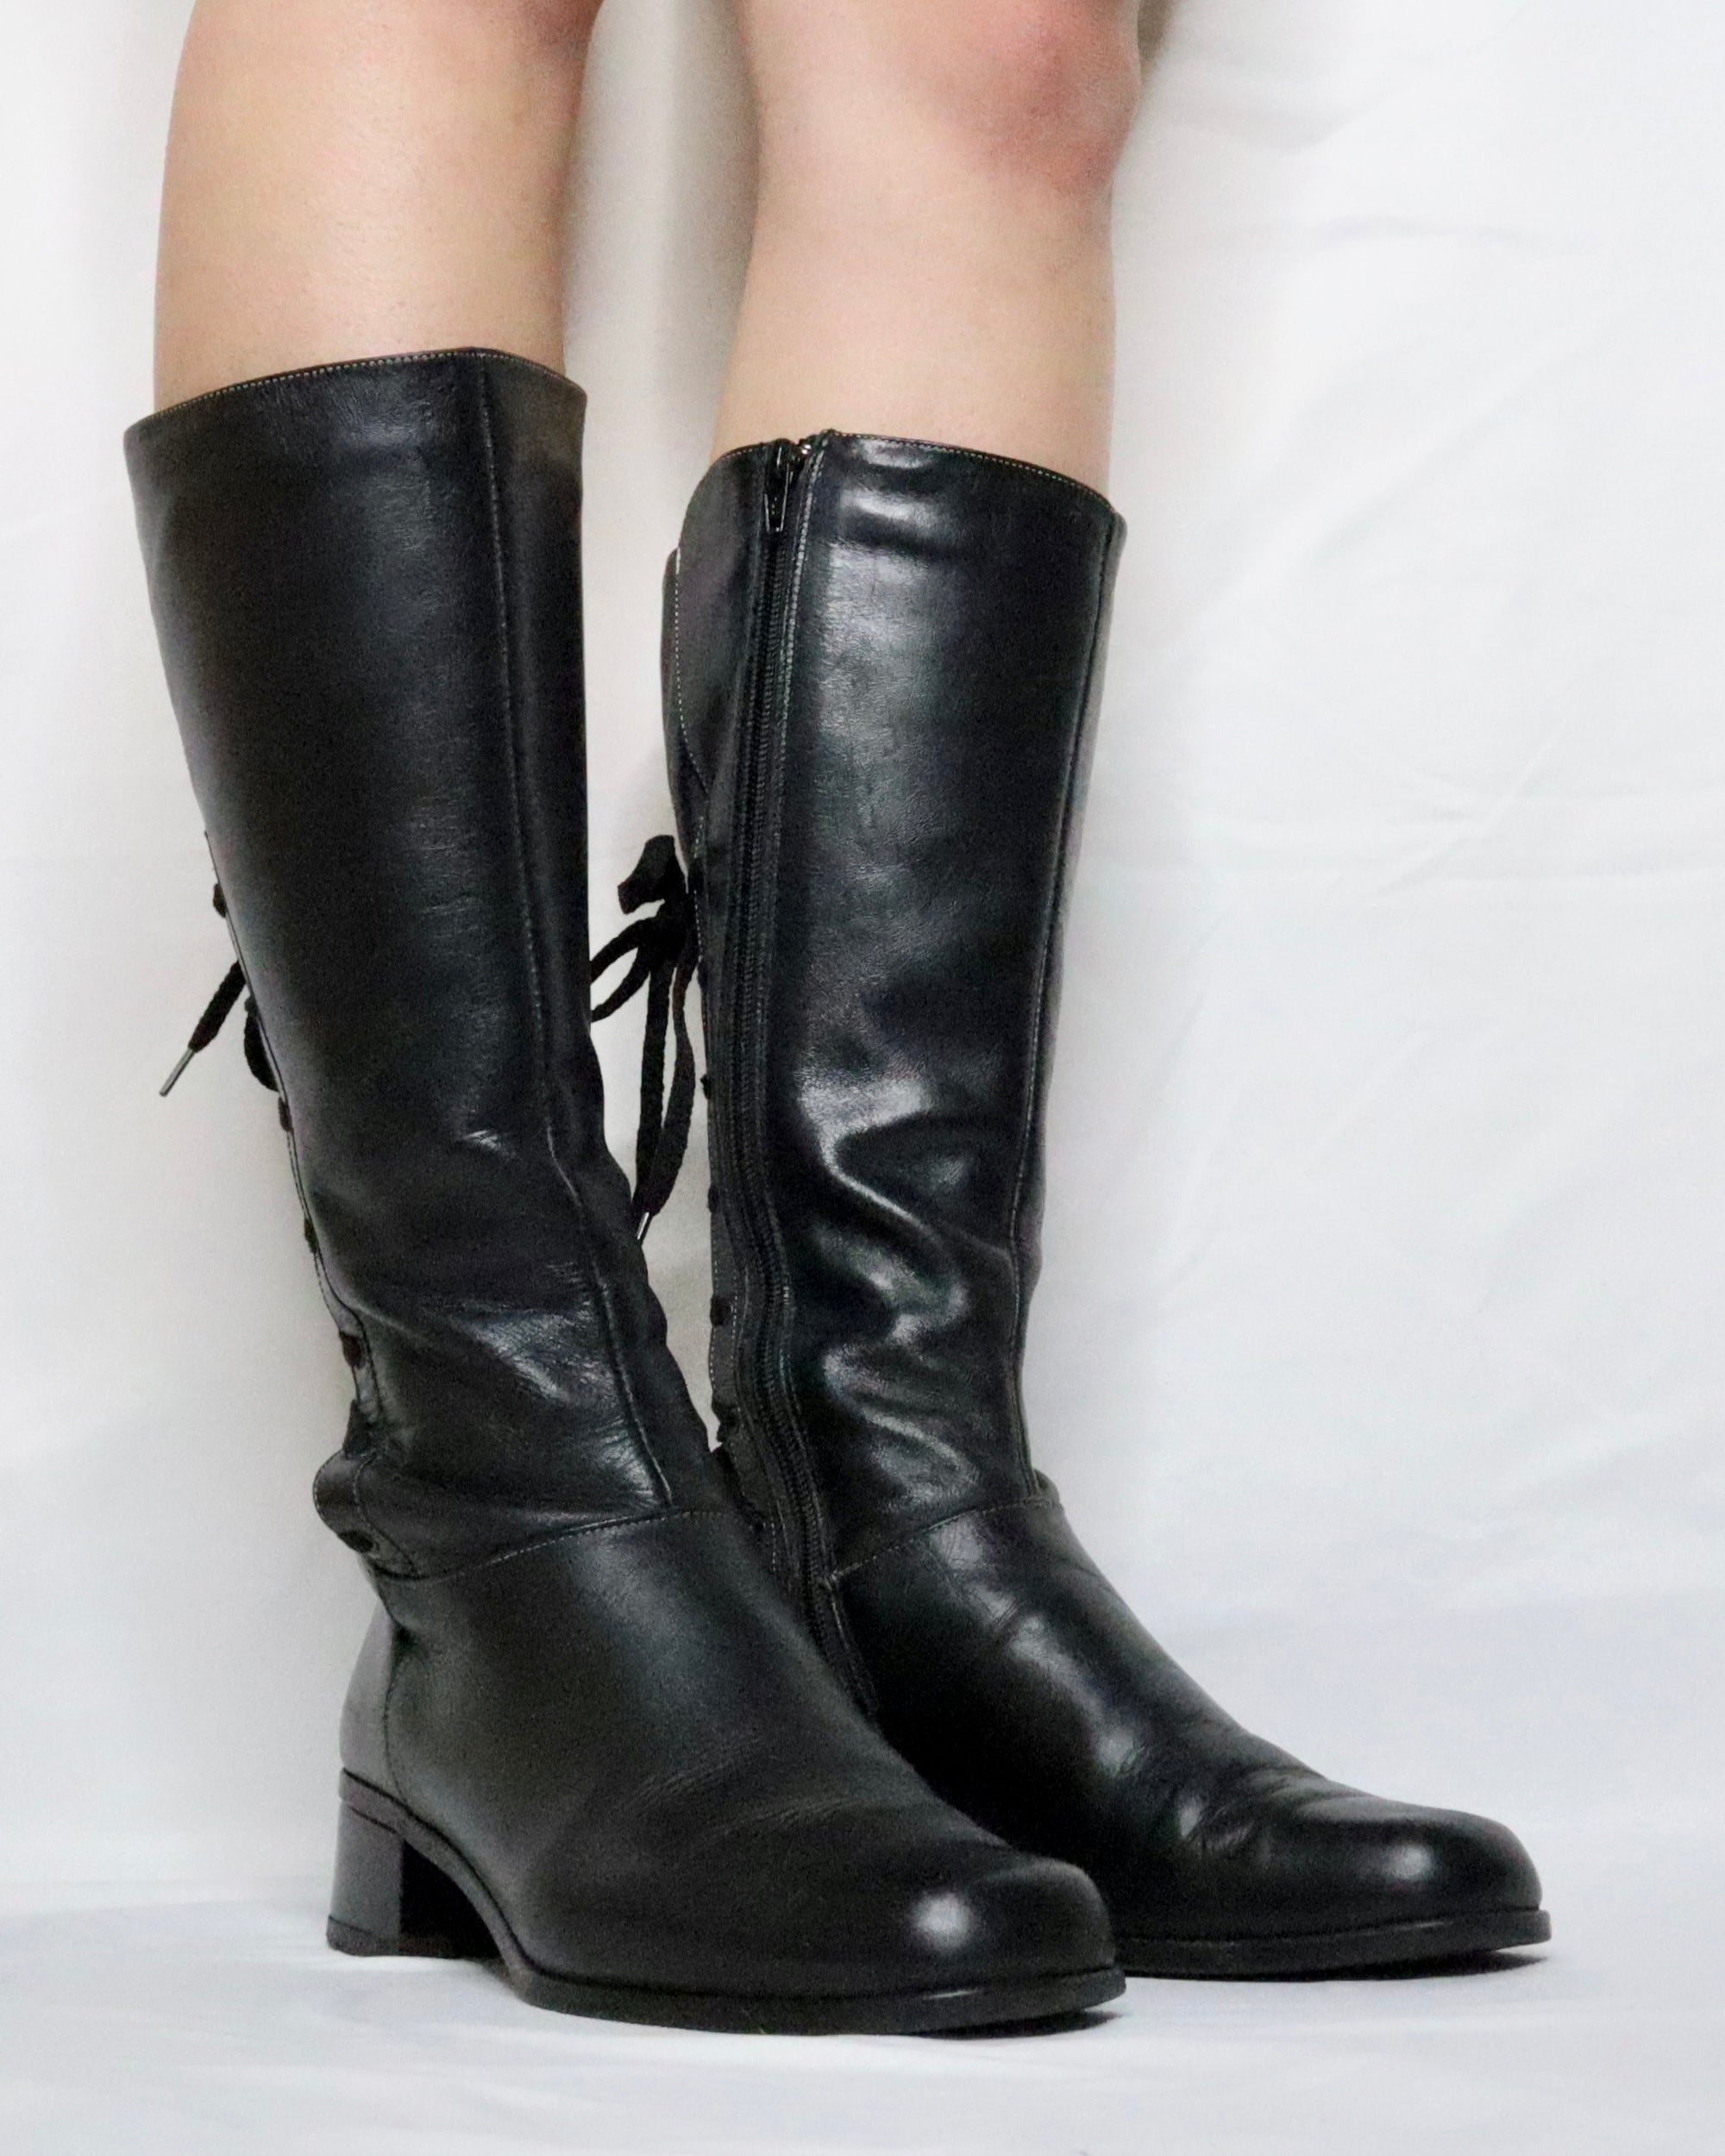 Black Leather Riding Boots (7-7.5 US) 